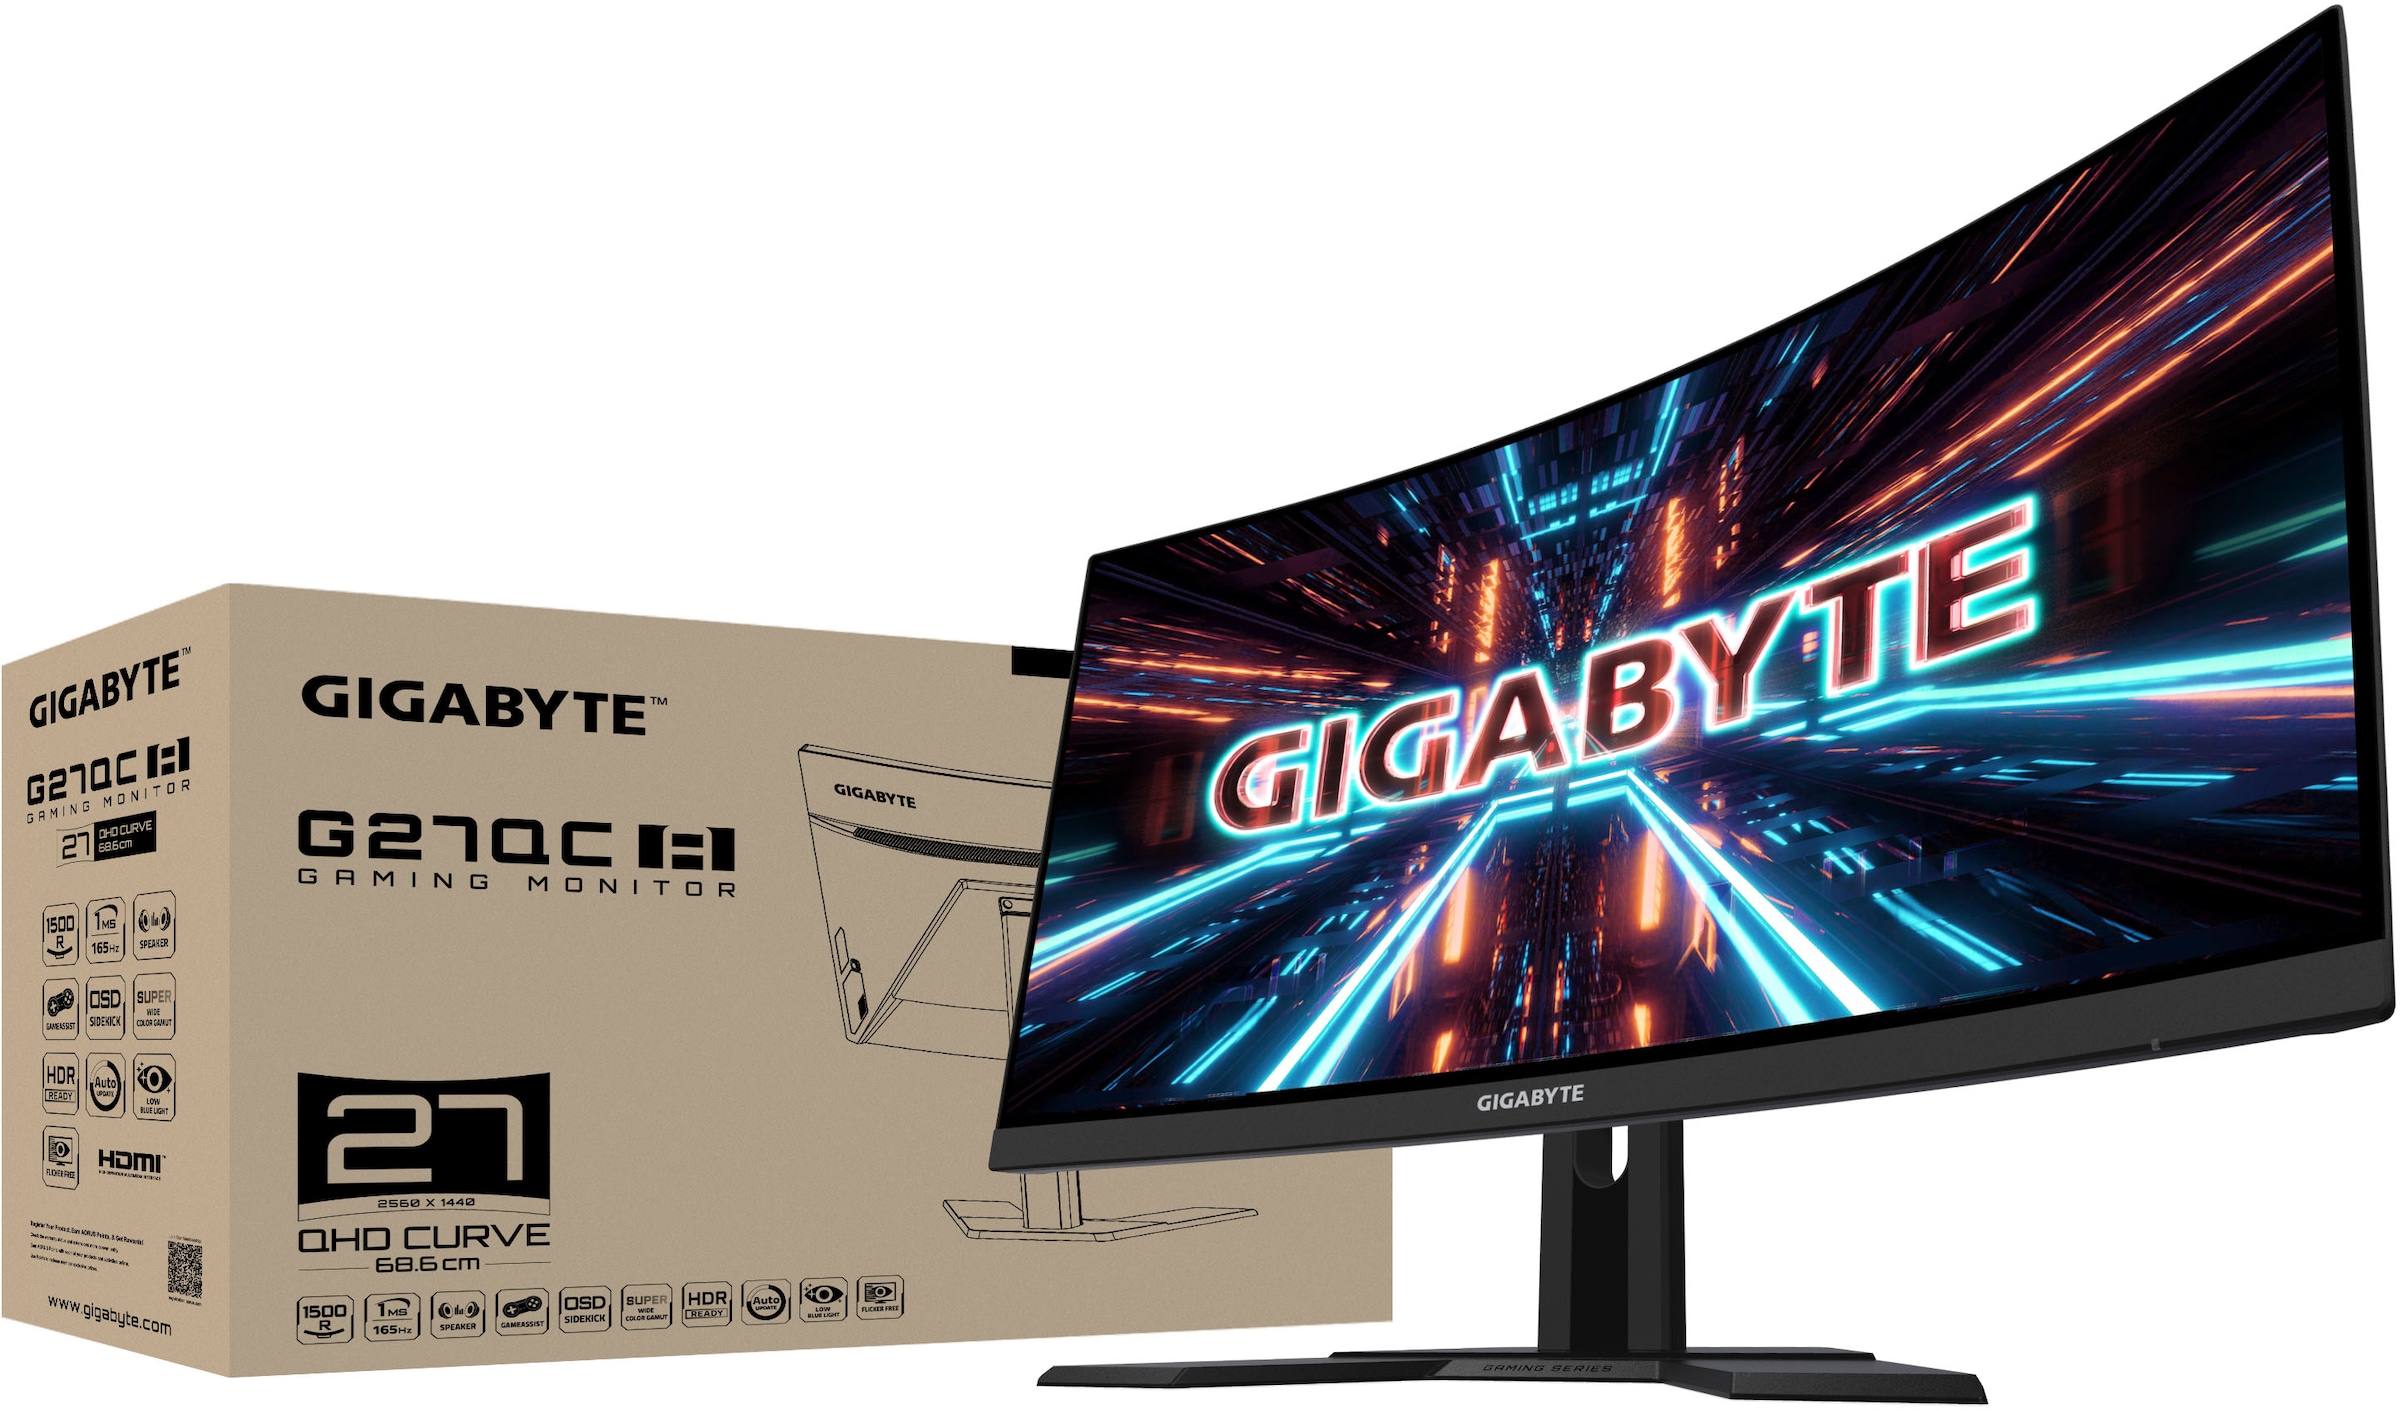 Gigabyte Curved-Gaming-Monitor »G27QC A«, px, jetzt OTTO QHD, 165 1440 1 68,5 x Reaktionszeit, Zoll, Hz cm/27 2560 bei ms